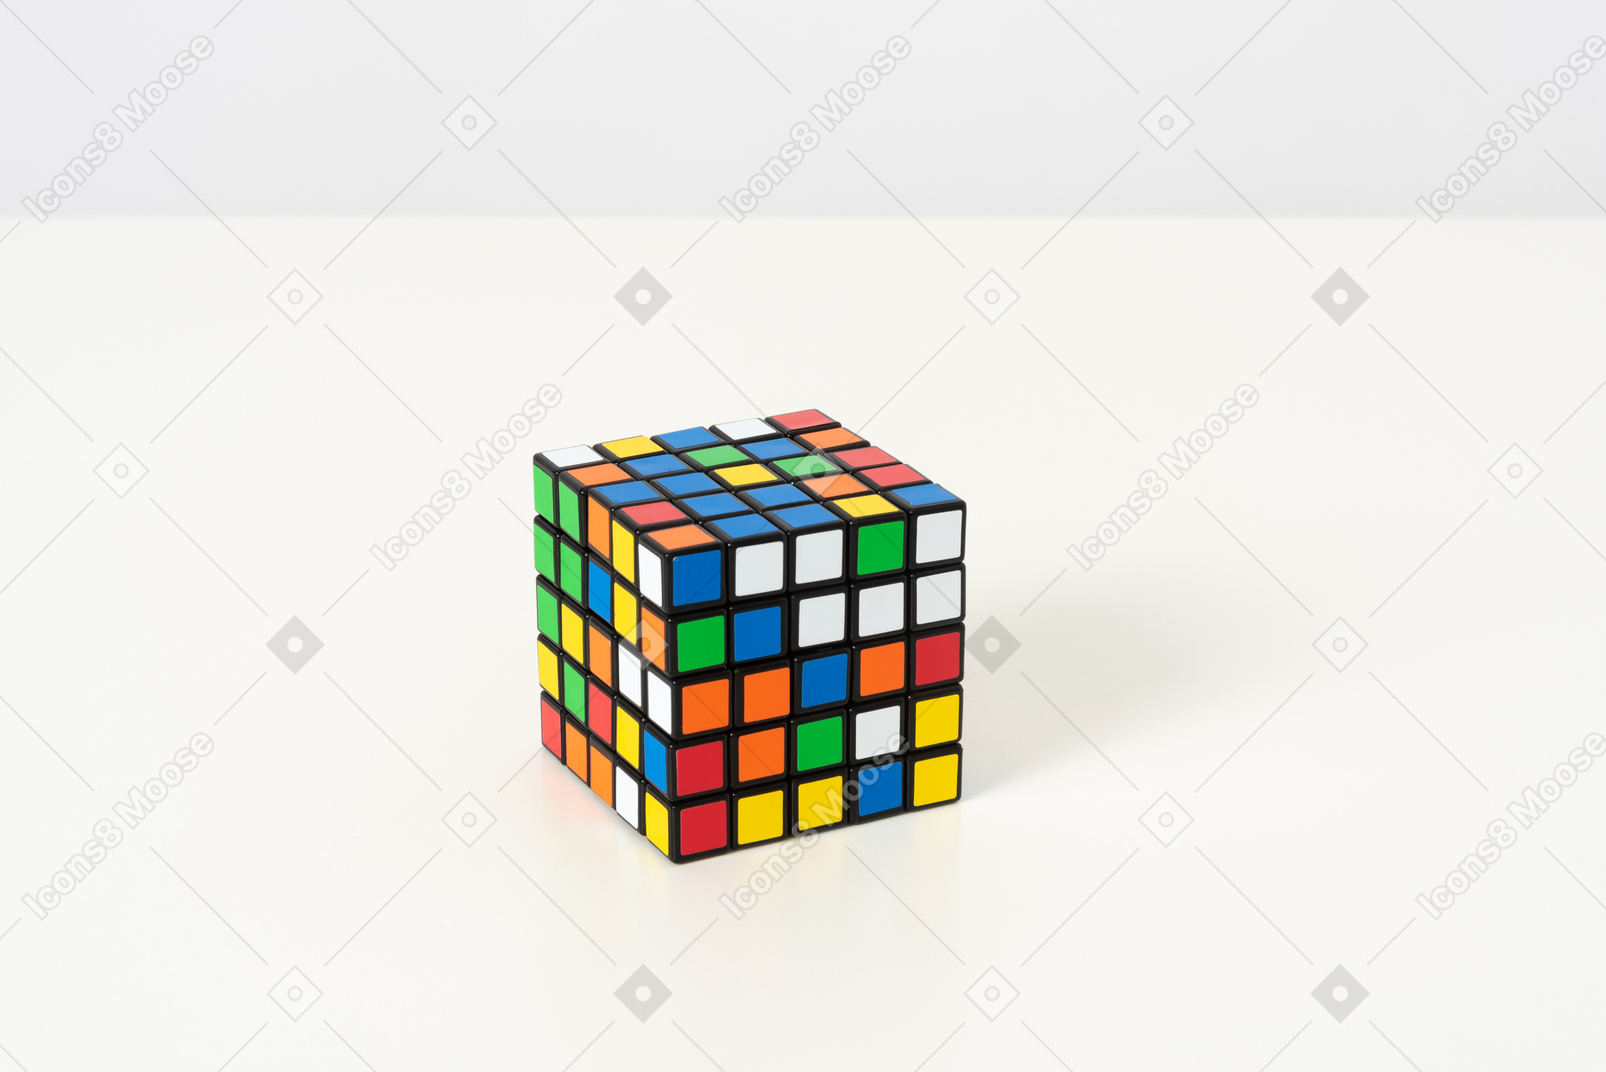 Rubic's cube on a white background